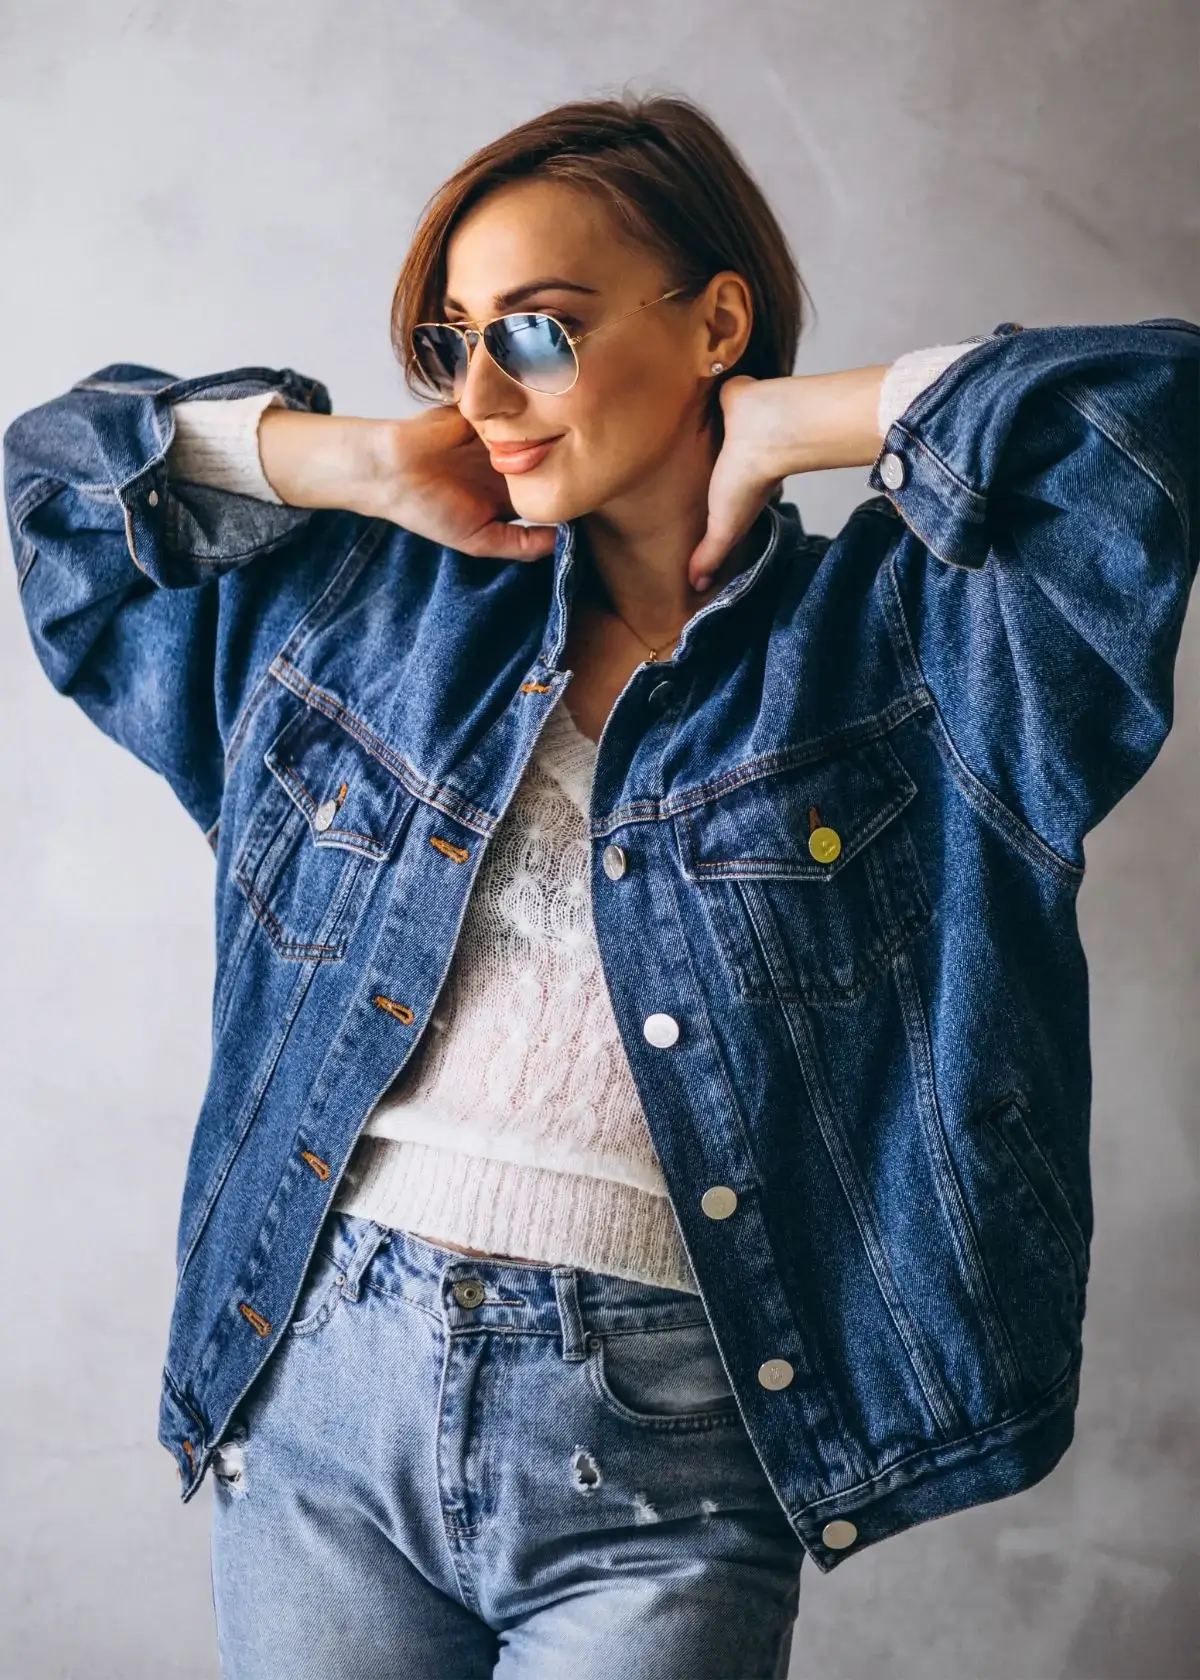 How to choose the right denim jacket?